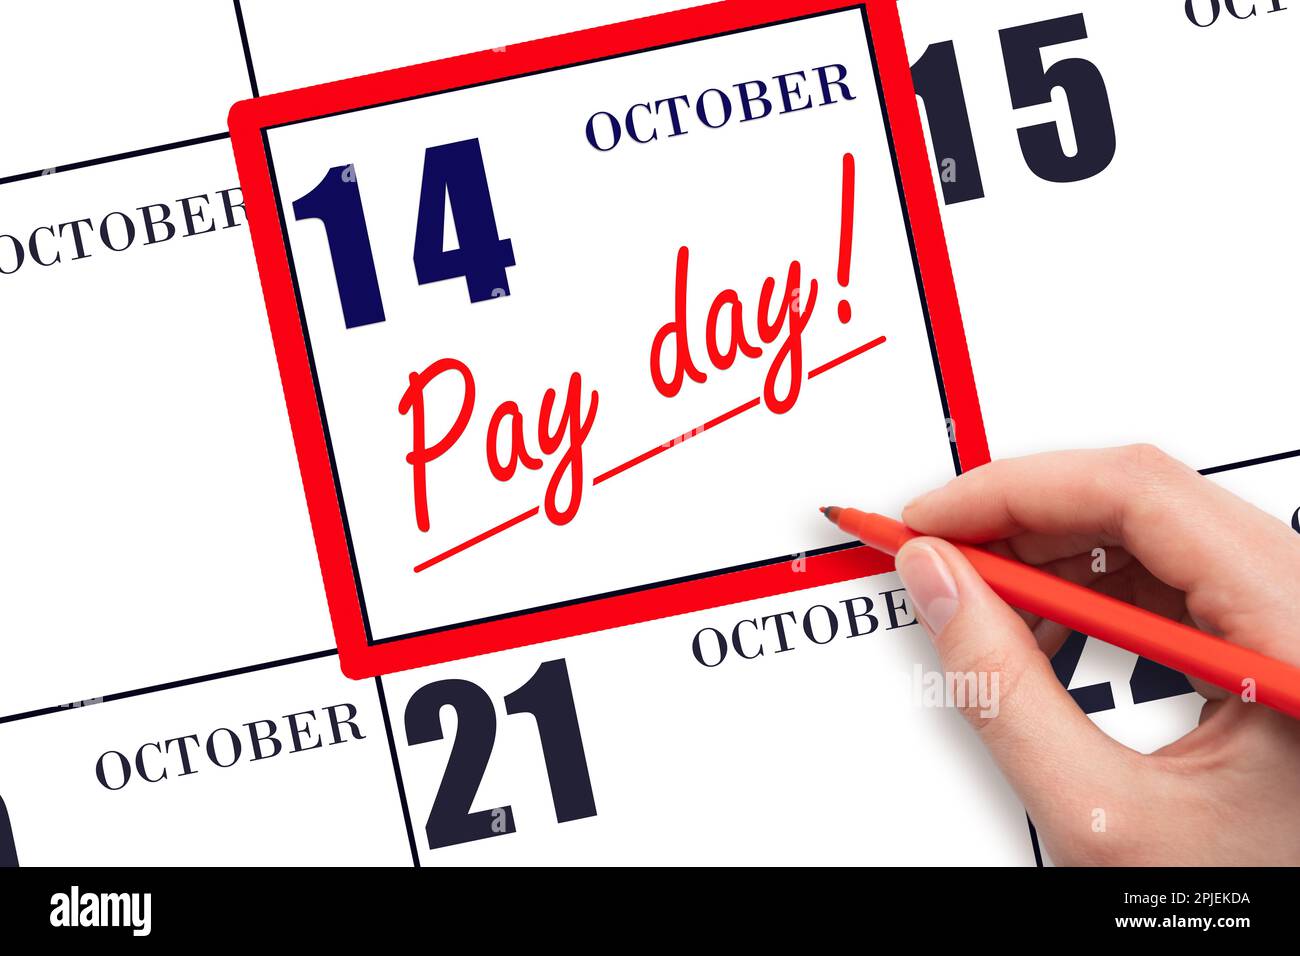 14th day of October. Hand writing text PAY DATE on calendar date October 14 and underline it. Payment due date. Reminder concept of payment. Autumn mo Stock Photo